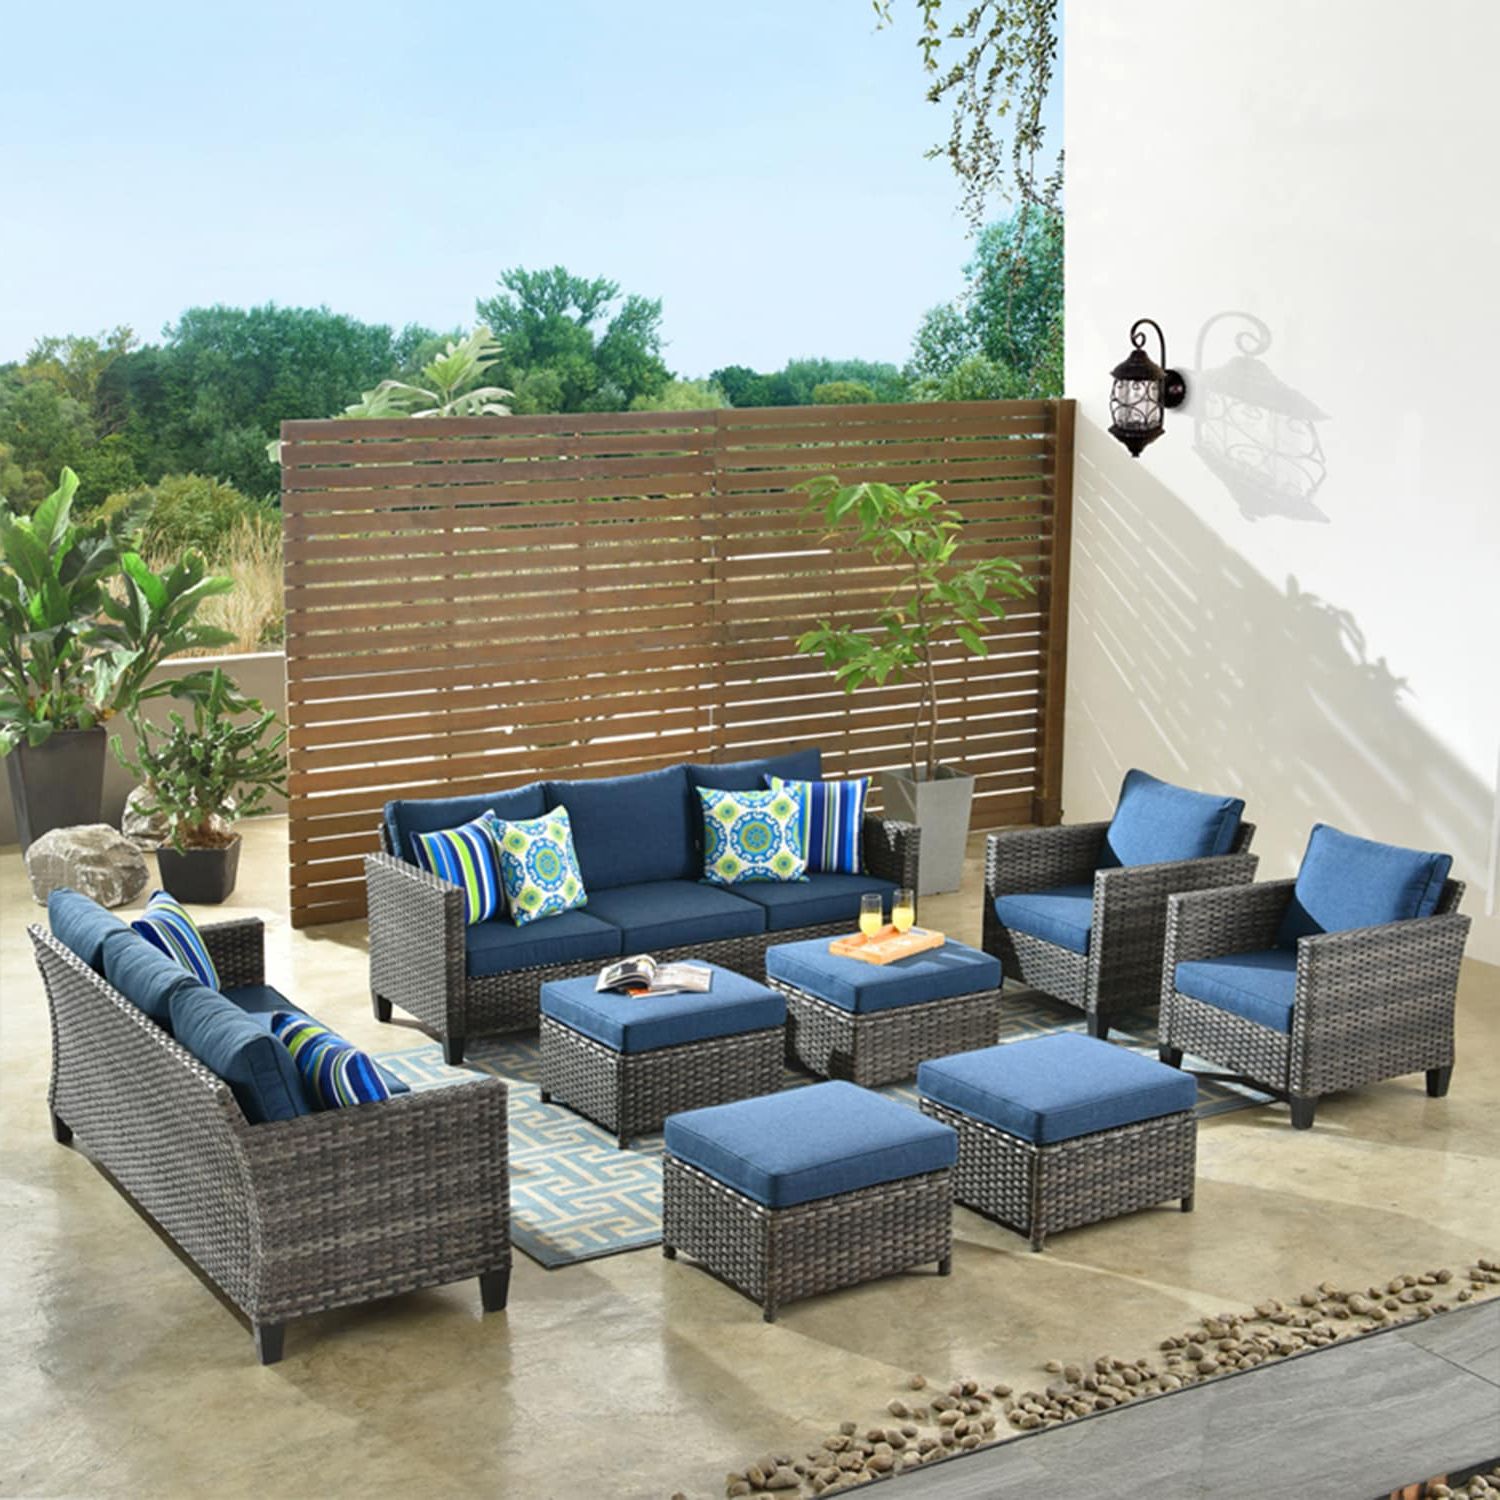 Most Popular Xizzi Gaea 8 Piece Wicker Patio Conversation Set With Blue Cushions In The  Patio Conversation Sets Department At Lowes Regarding 8 Pcs Outdoor Patio Furniture Set (View 6 of 15)